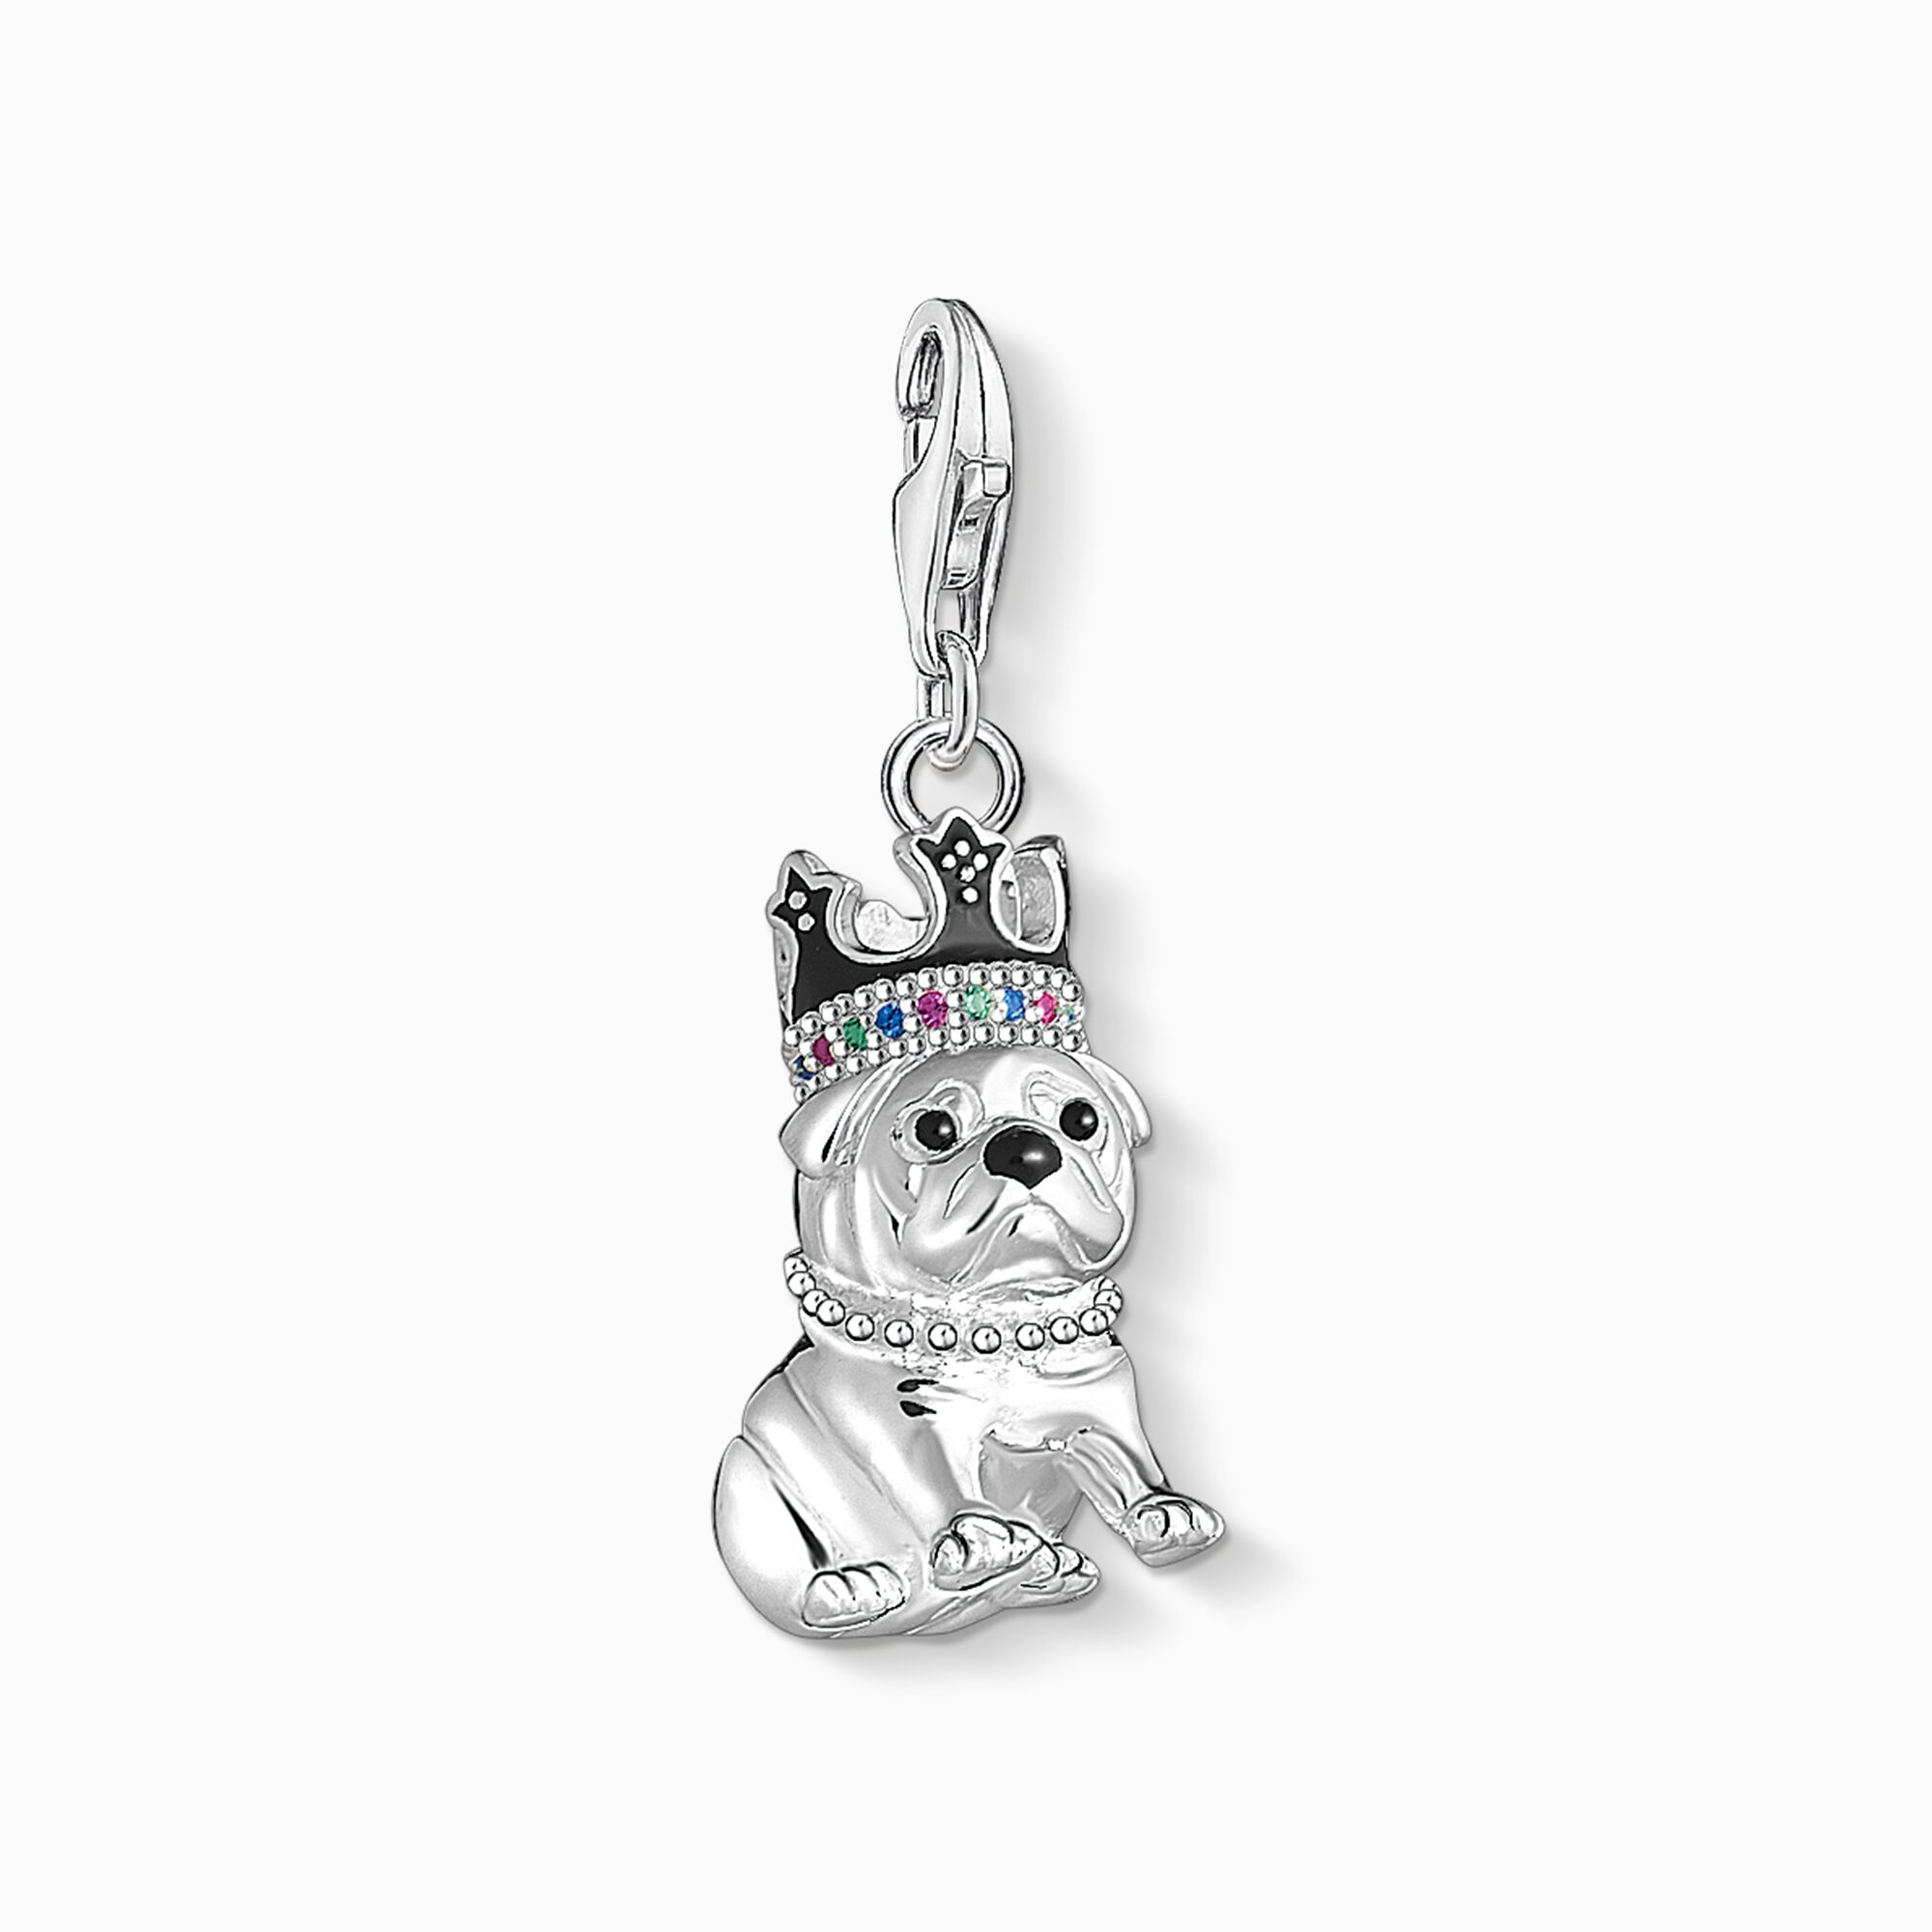 Charm pendant Bulldog with crown from the Charm Club collection in the THOMAS SABO online store